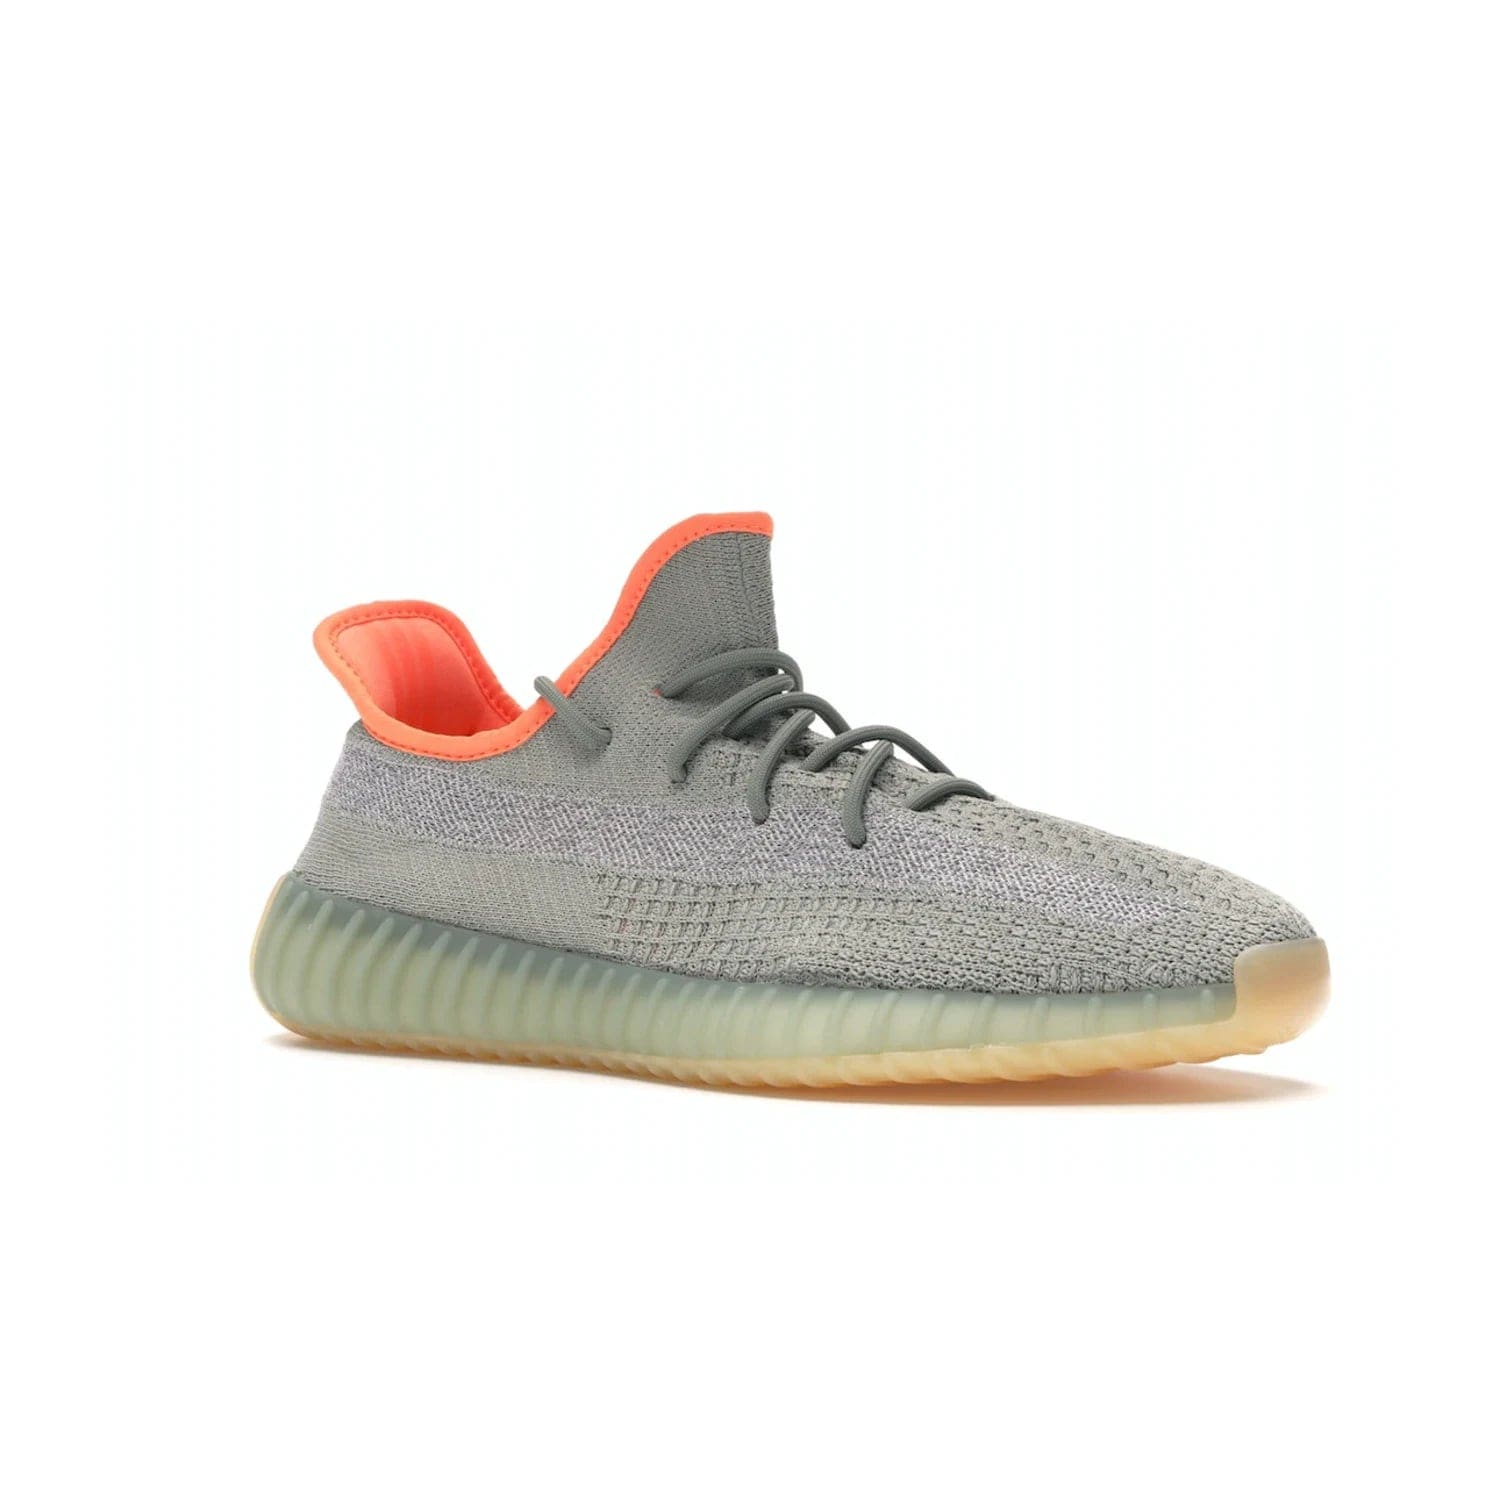 adidas Yeezy Boost 350 V2 Desert Sage - Image 4 - Only at www.BallersClubKickz.com - Upgrade your style with the adidas Yeezy Boost 350 V2 Desert Sage. This 350V2 features a Desert Sage primeknit upper with tonal side stripe, and an orange-highlighted translucent Boost cushioning sole. Stay on-trend in effortless style.